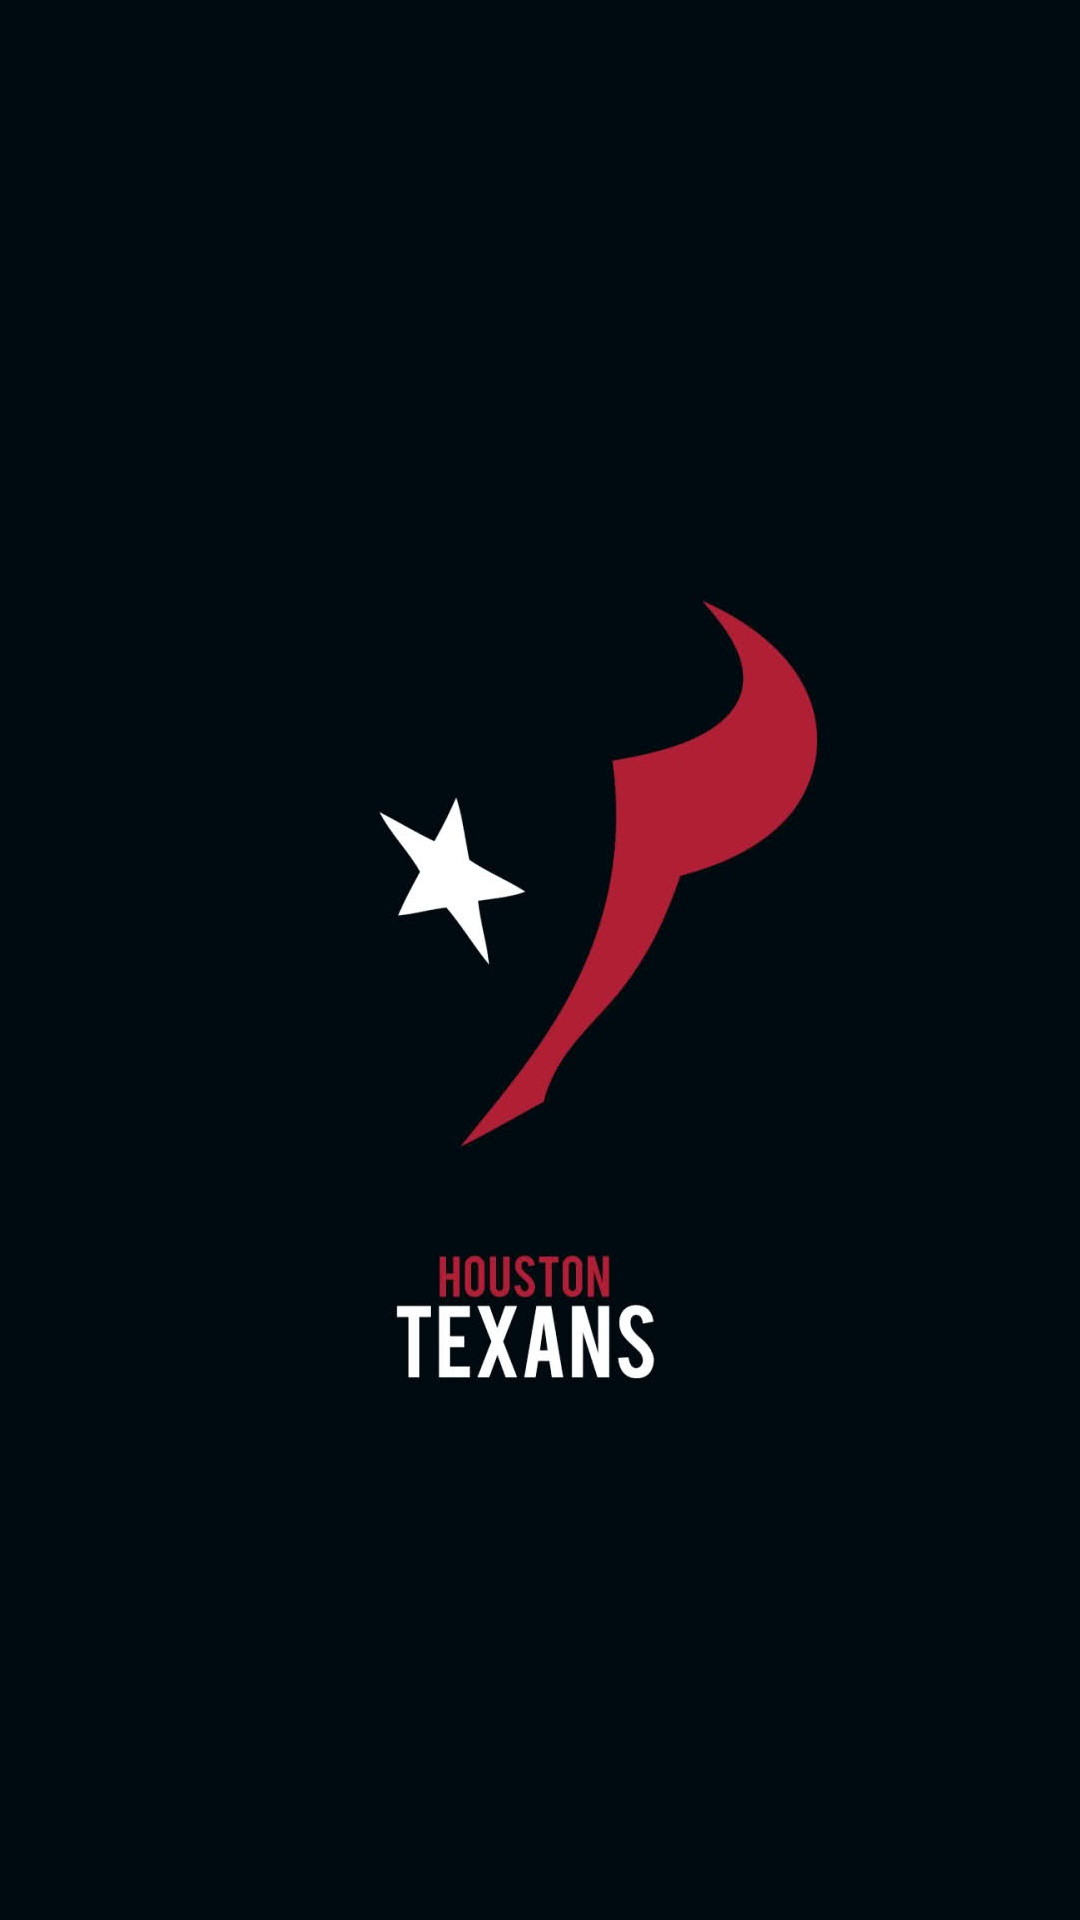 Houston Texans iPhone Wallpaper New with high-resolution 1080x1920 pixel. Donwload and set as wallpaper for your iPhone X, iPhone XS home screen backgrounds, XS Max, XR, iPhone8 lock screen wallpaper, iPhone 7, 6, SE and other mobile devices